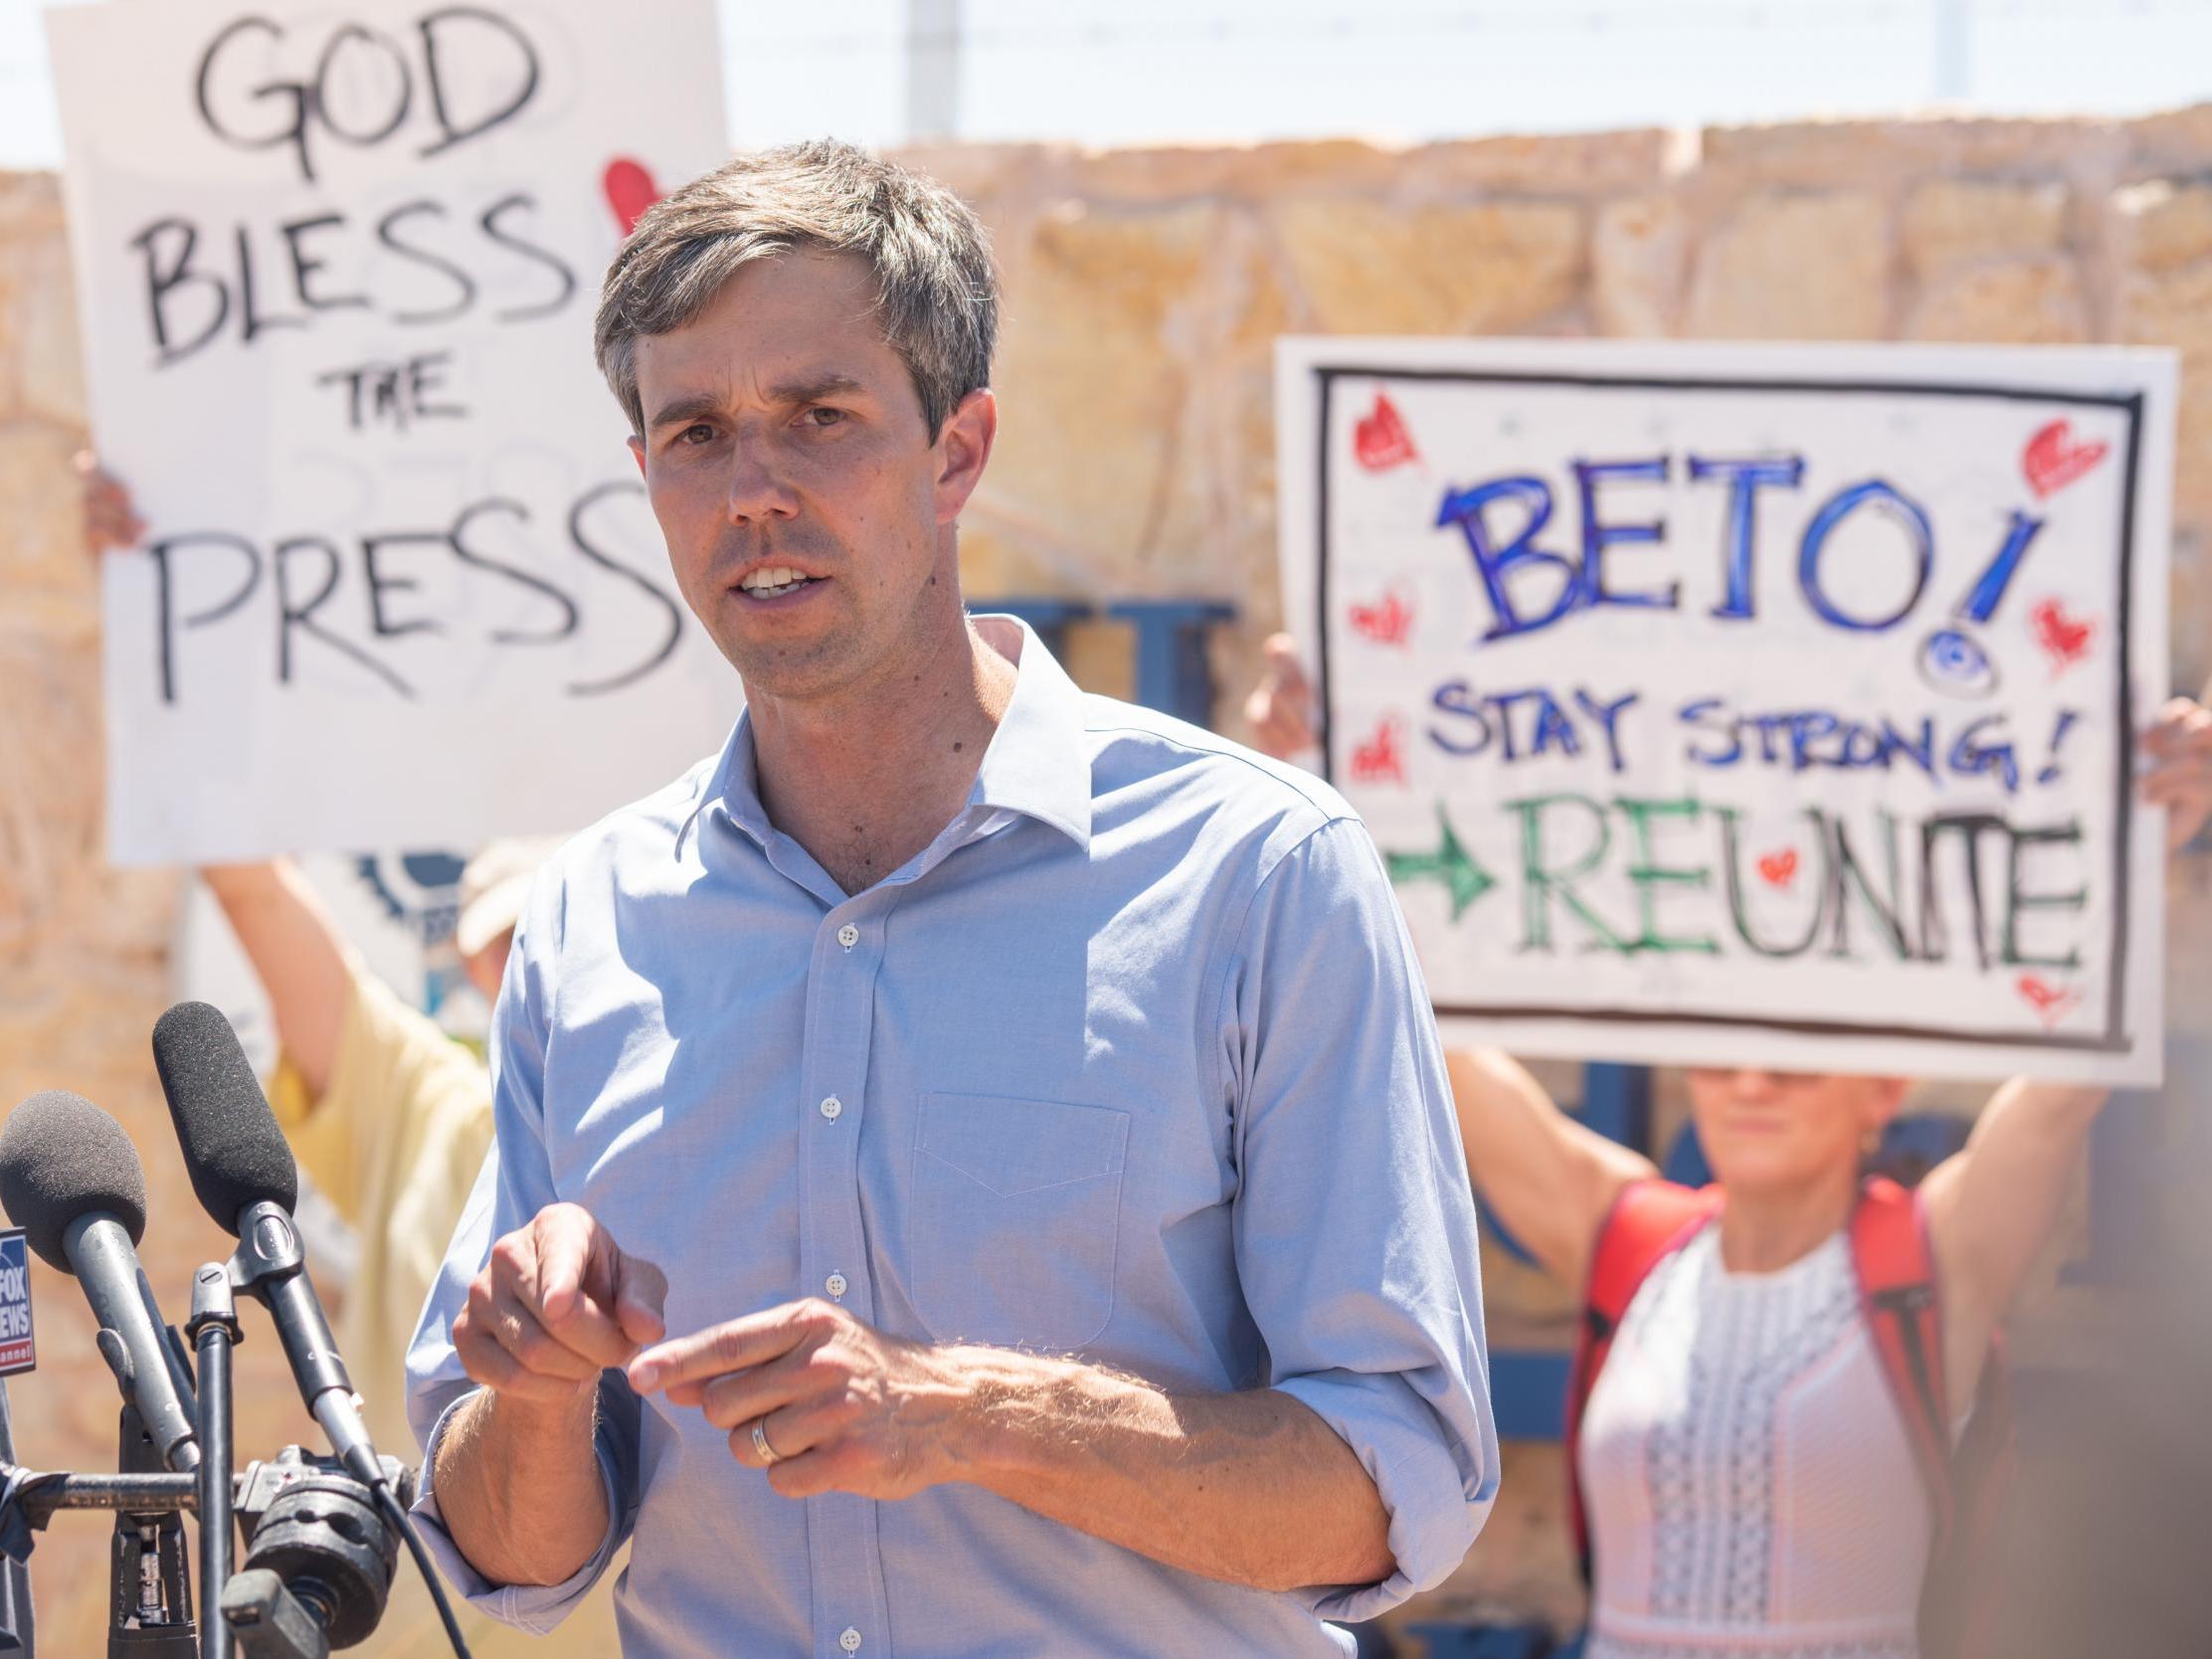 Beto O'Rourke has gained an extraordinary amount of support during his once-longshot candidacy against Ted Cruz in Texas. Will an anti-BBQ allegation bring down his Democratic senatorial campaign?